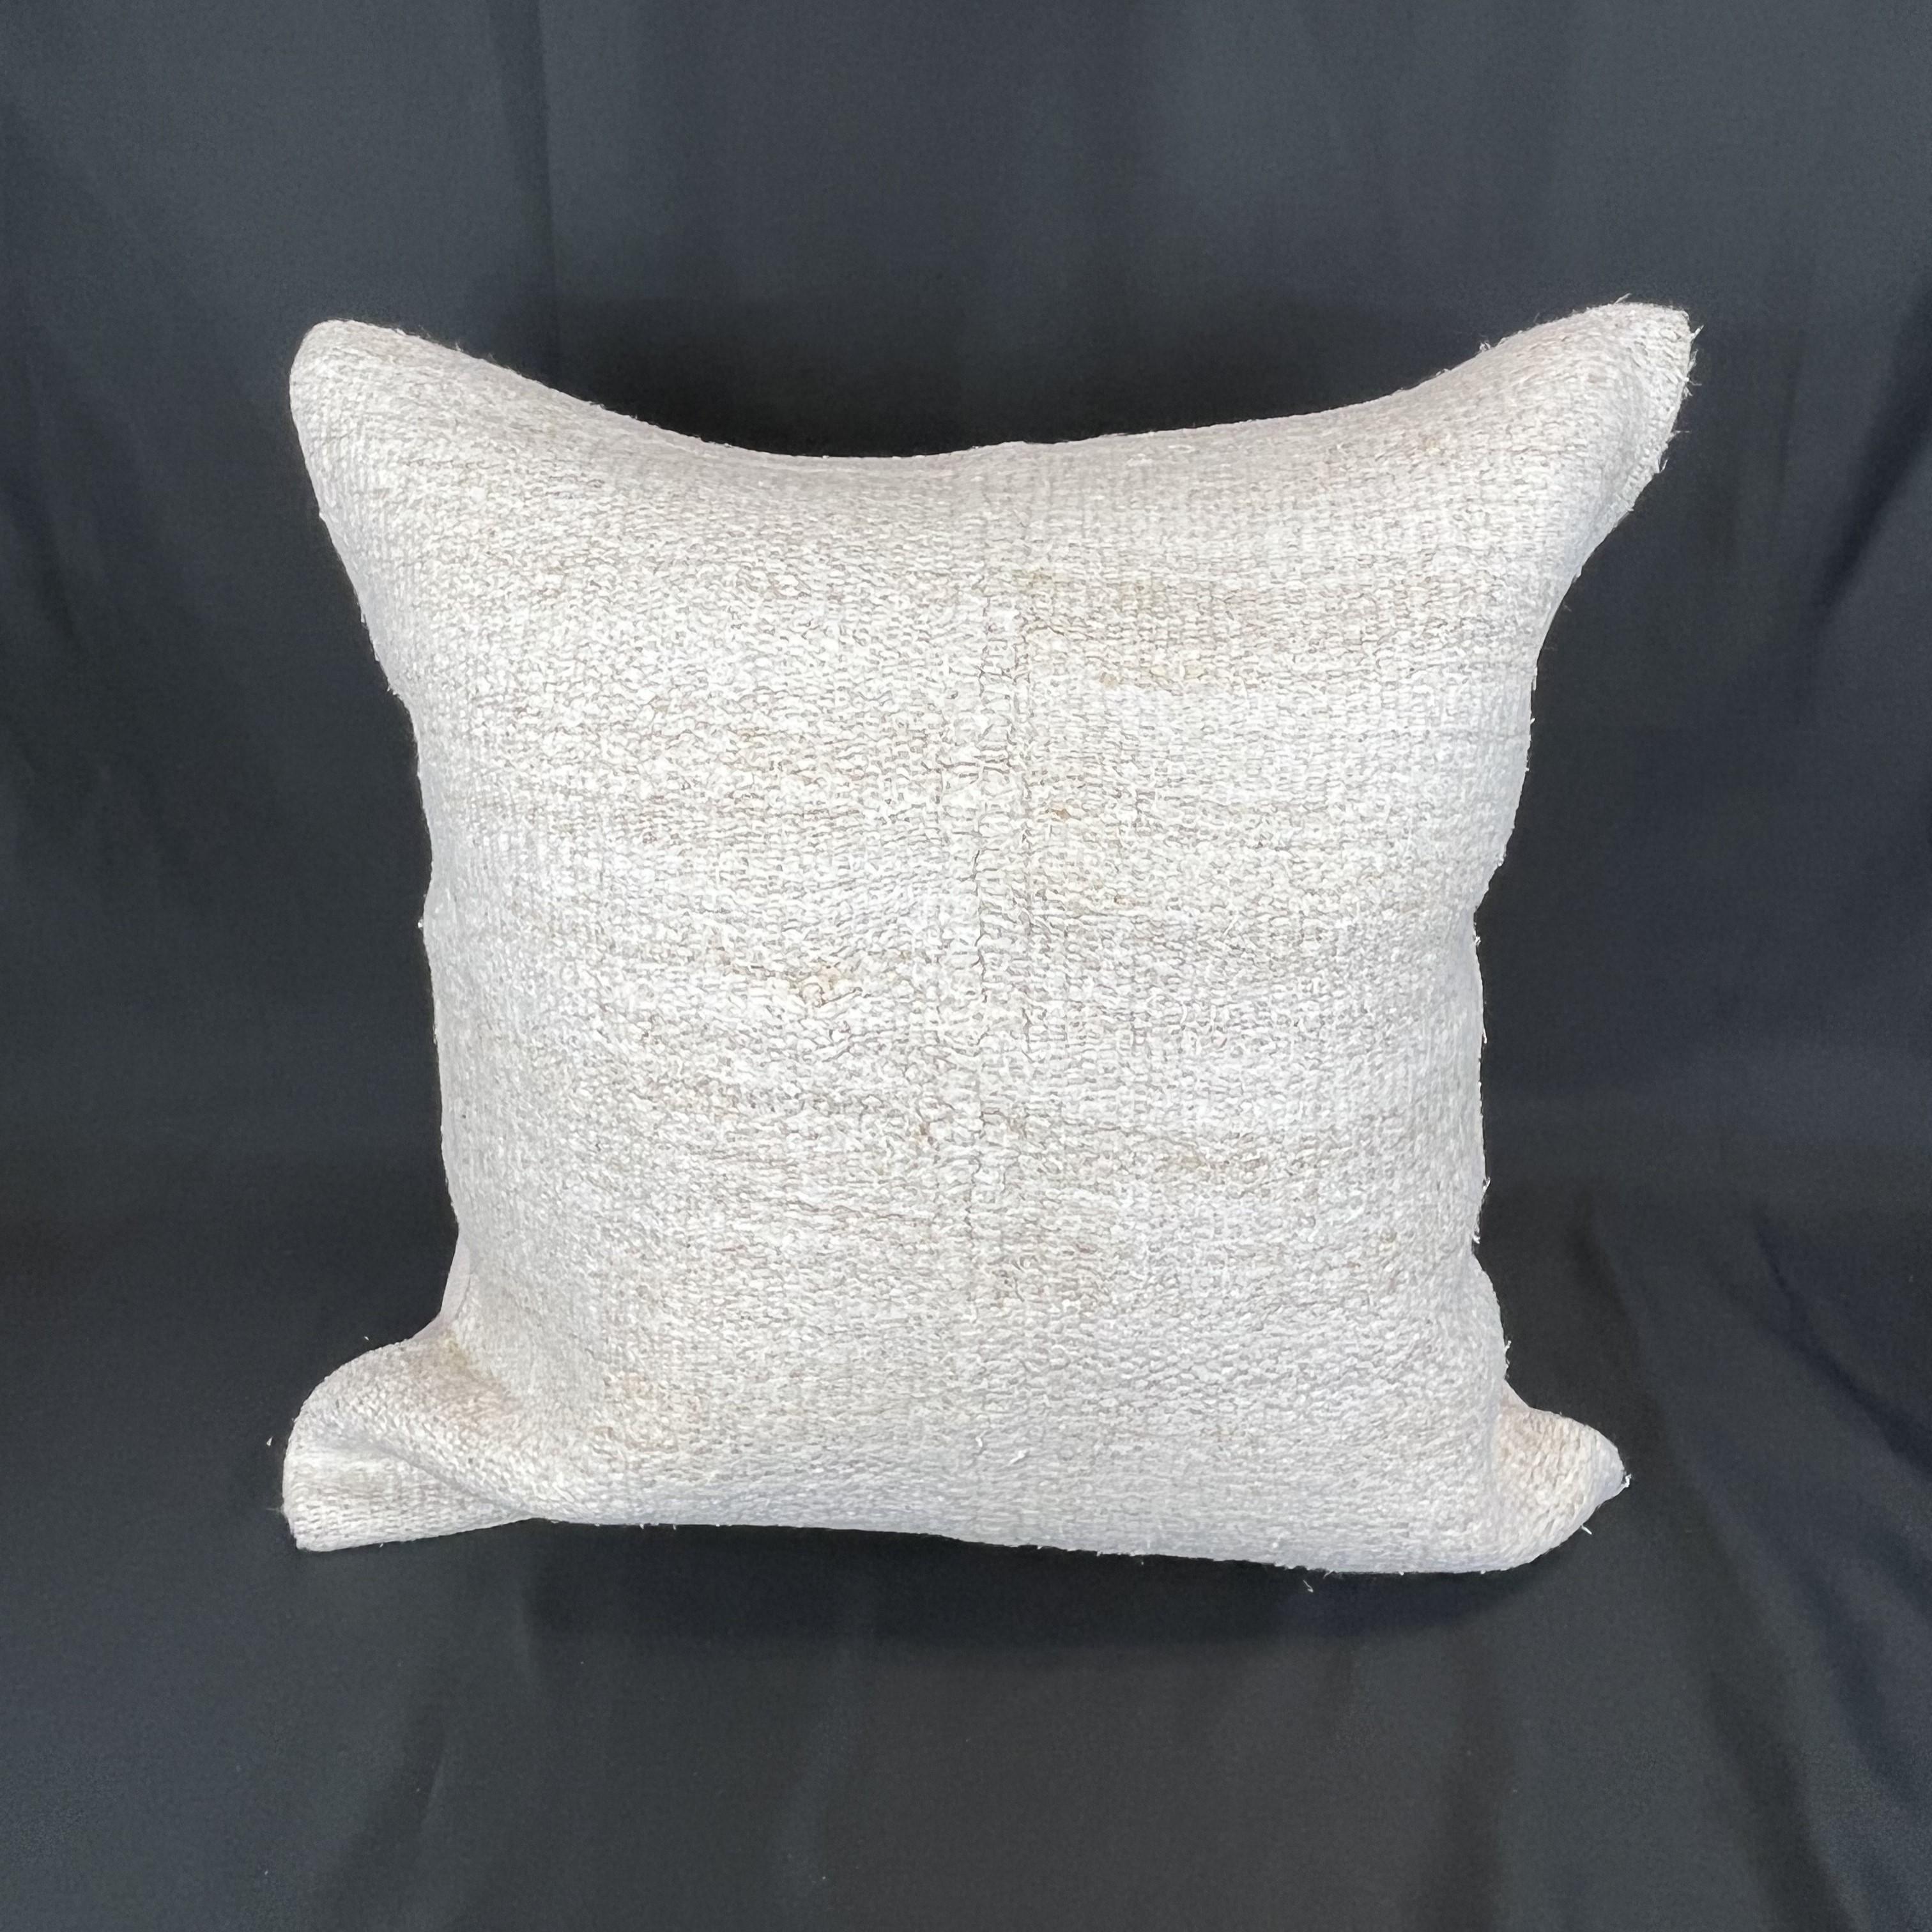 Looking for a sustainable and eco-friendly addition to your home decor? Check out our hemp pillow cover, perfect for adding a natural touch to your living space. Made from high-quality hemp fibers, this pillow cover is not only durable but also